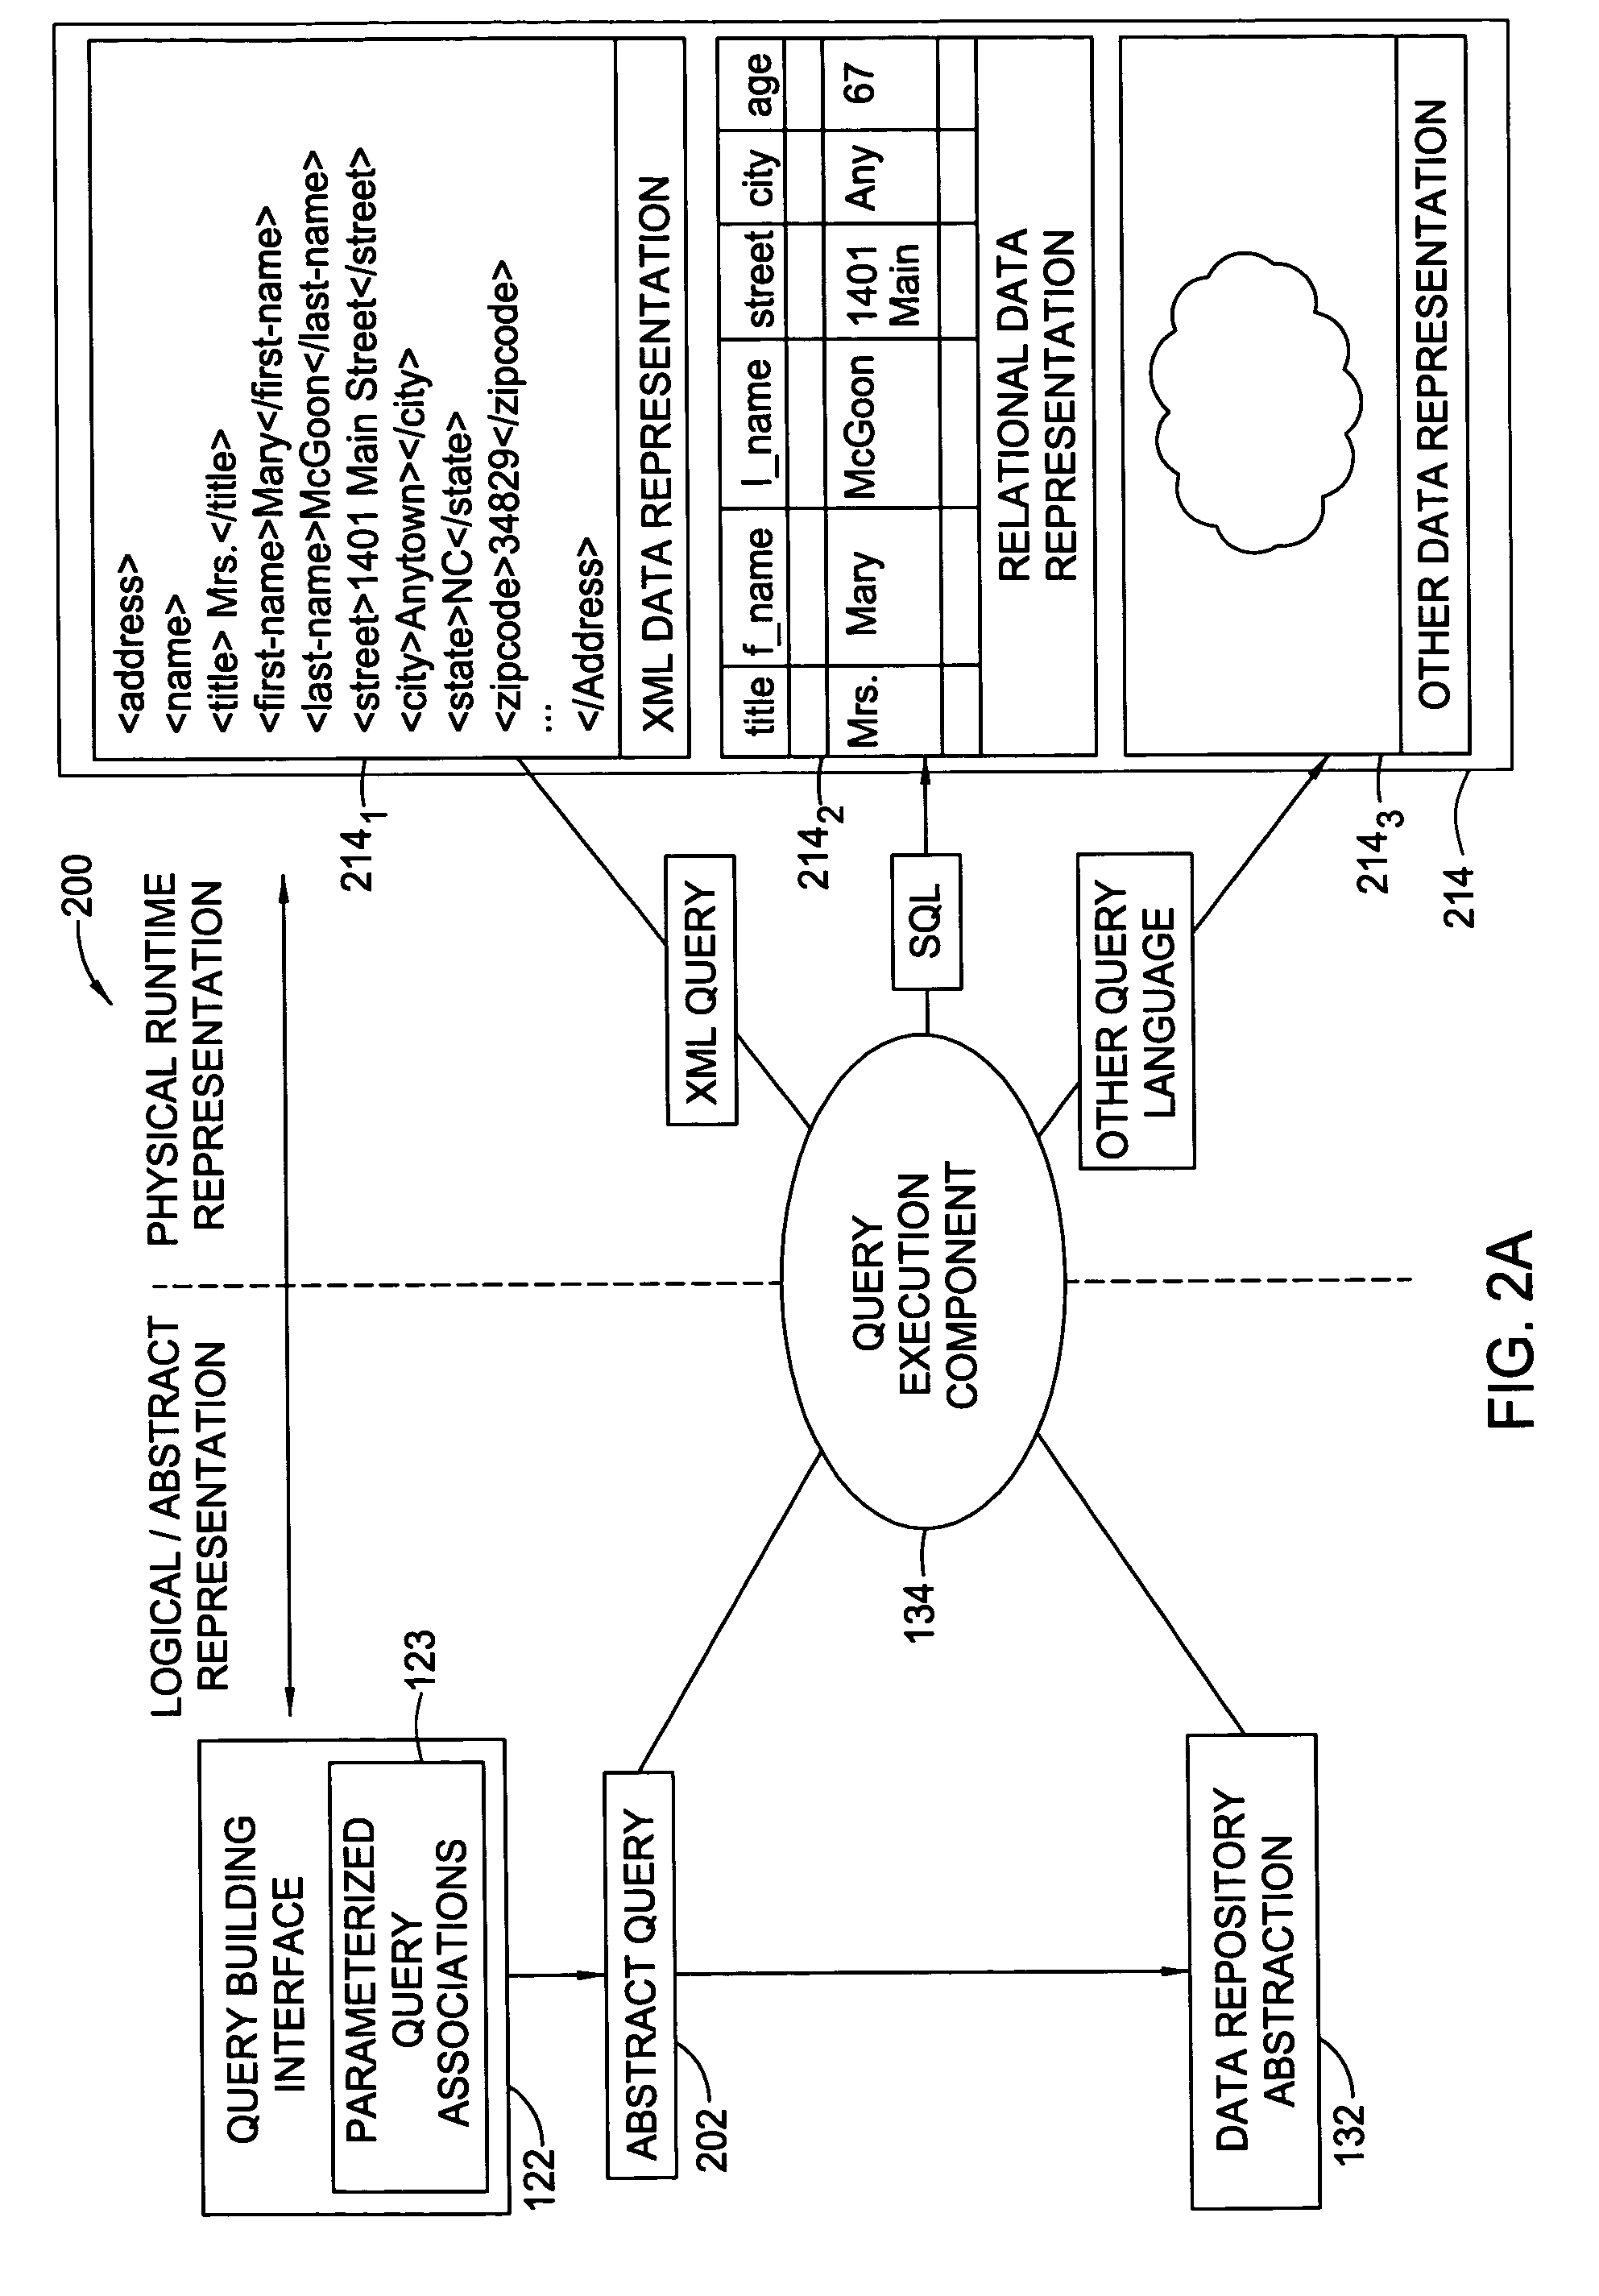 Method of managing and providing parameterized queries